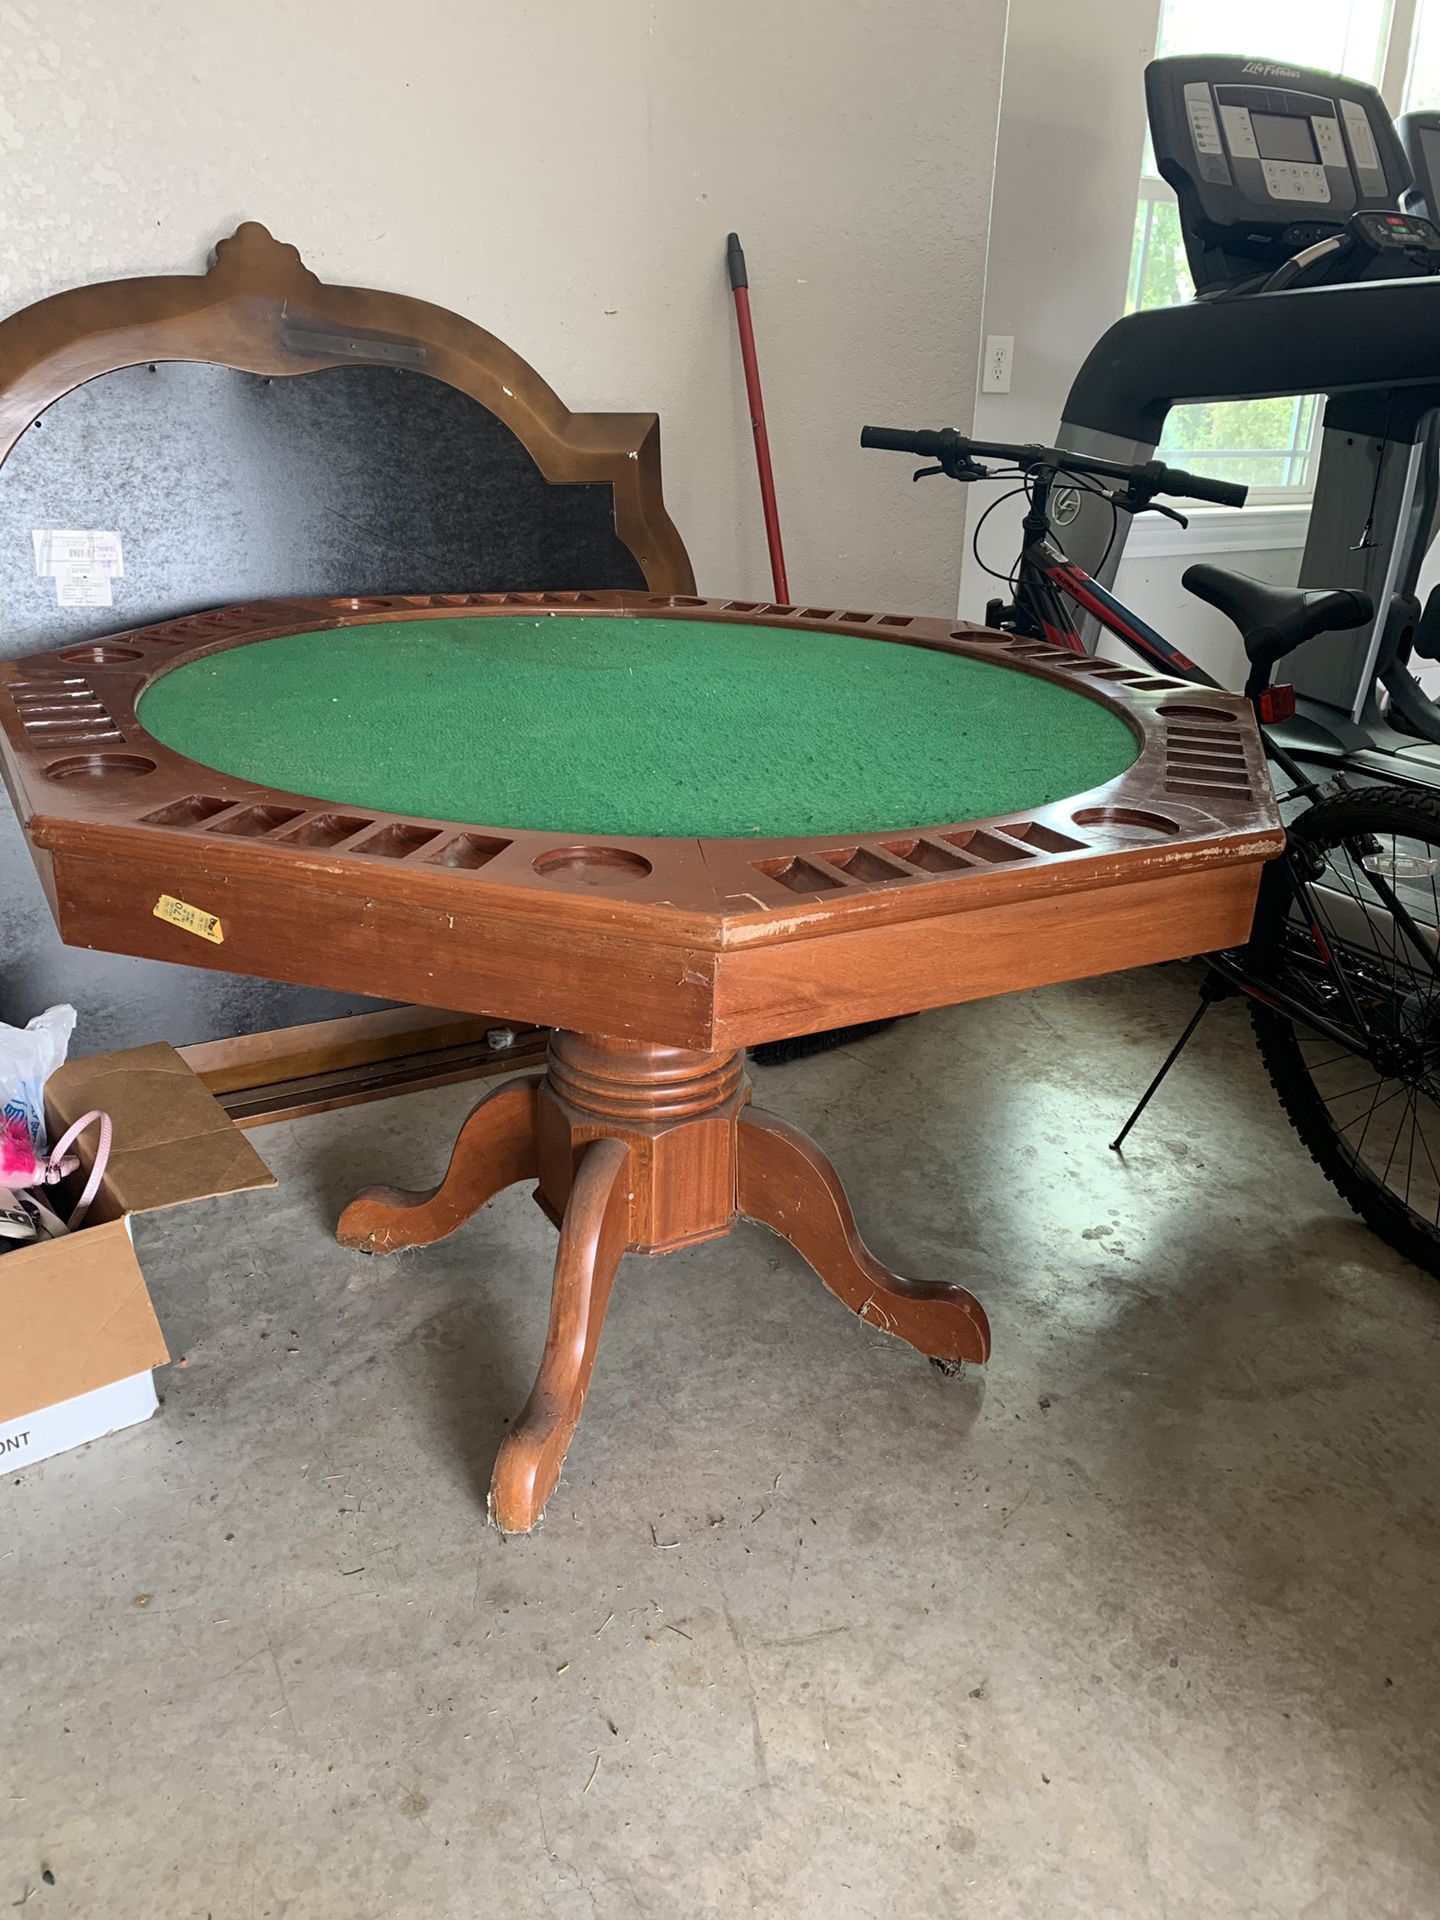 Poker table with cover